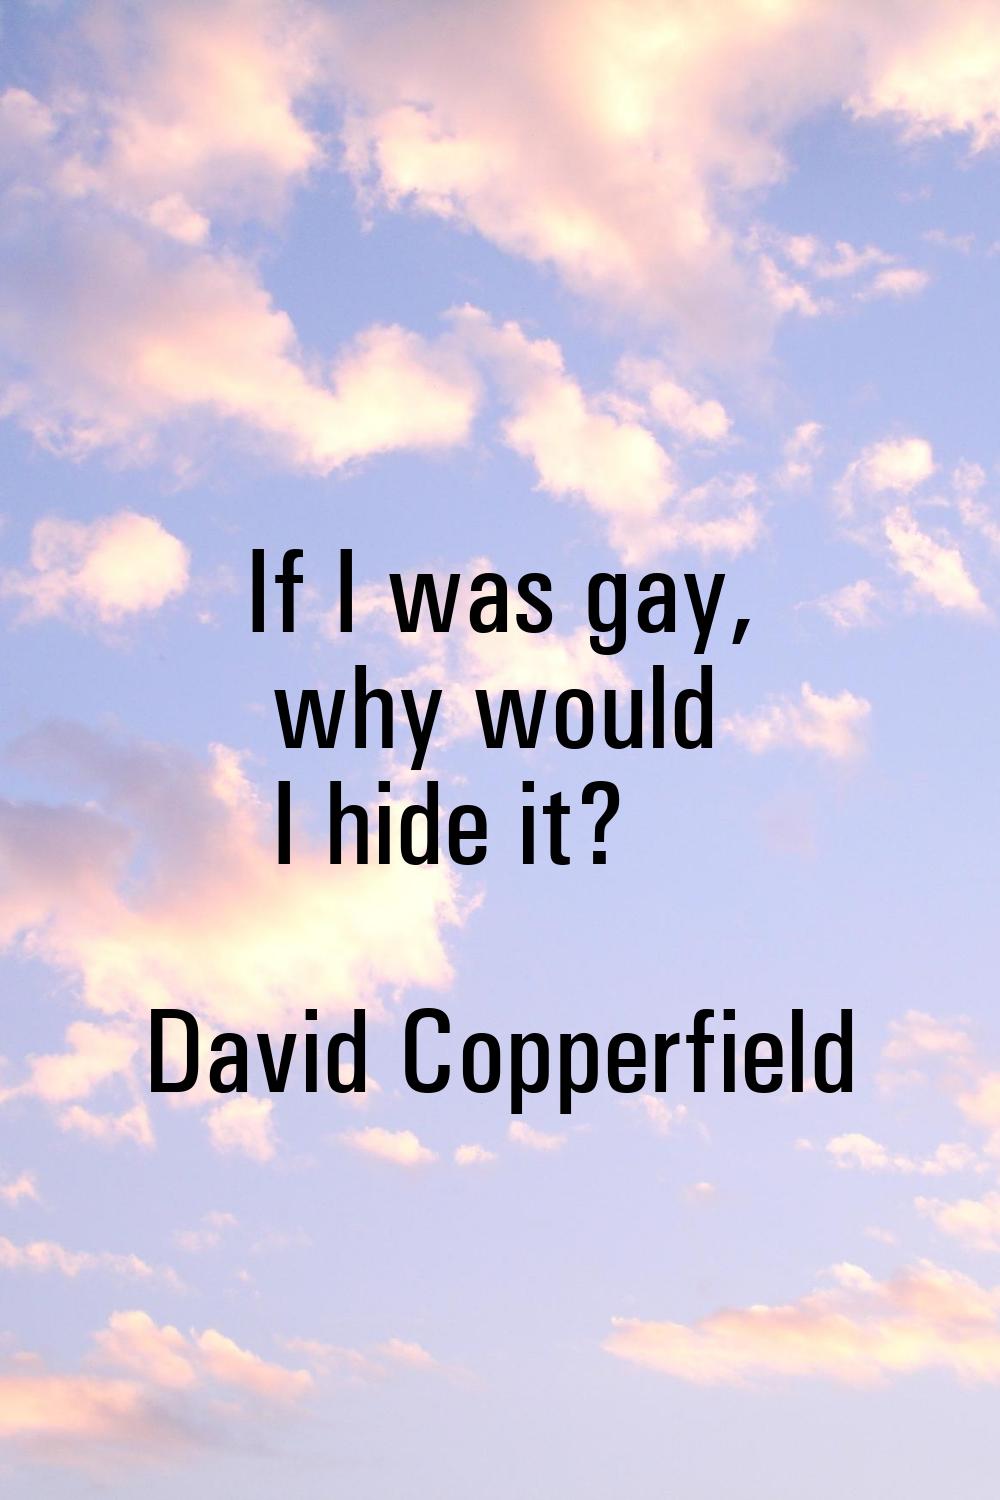 If I was gay, why would I hide it?